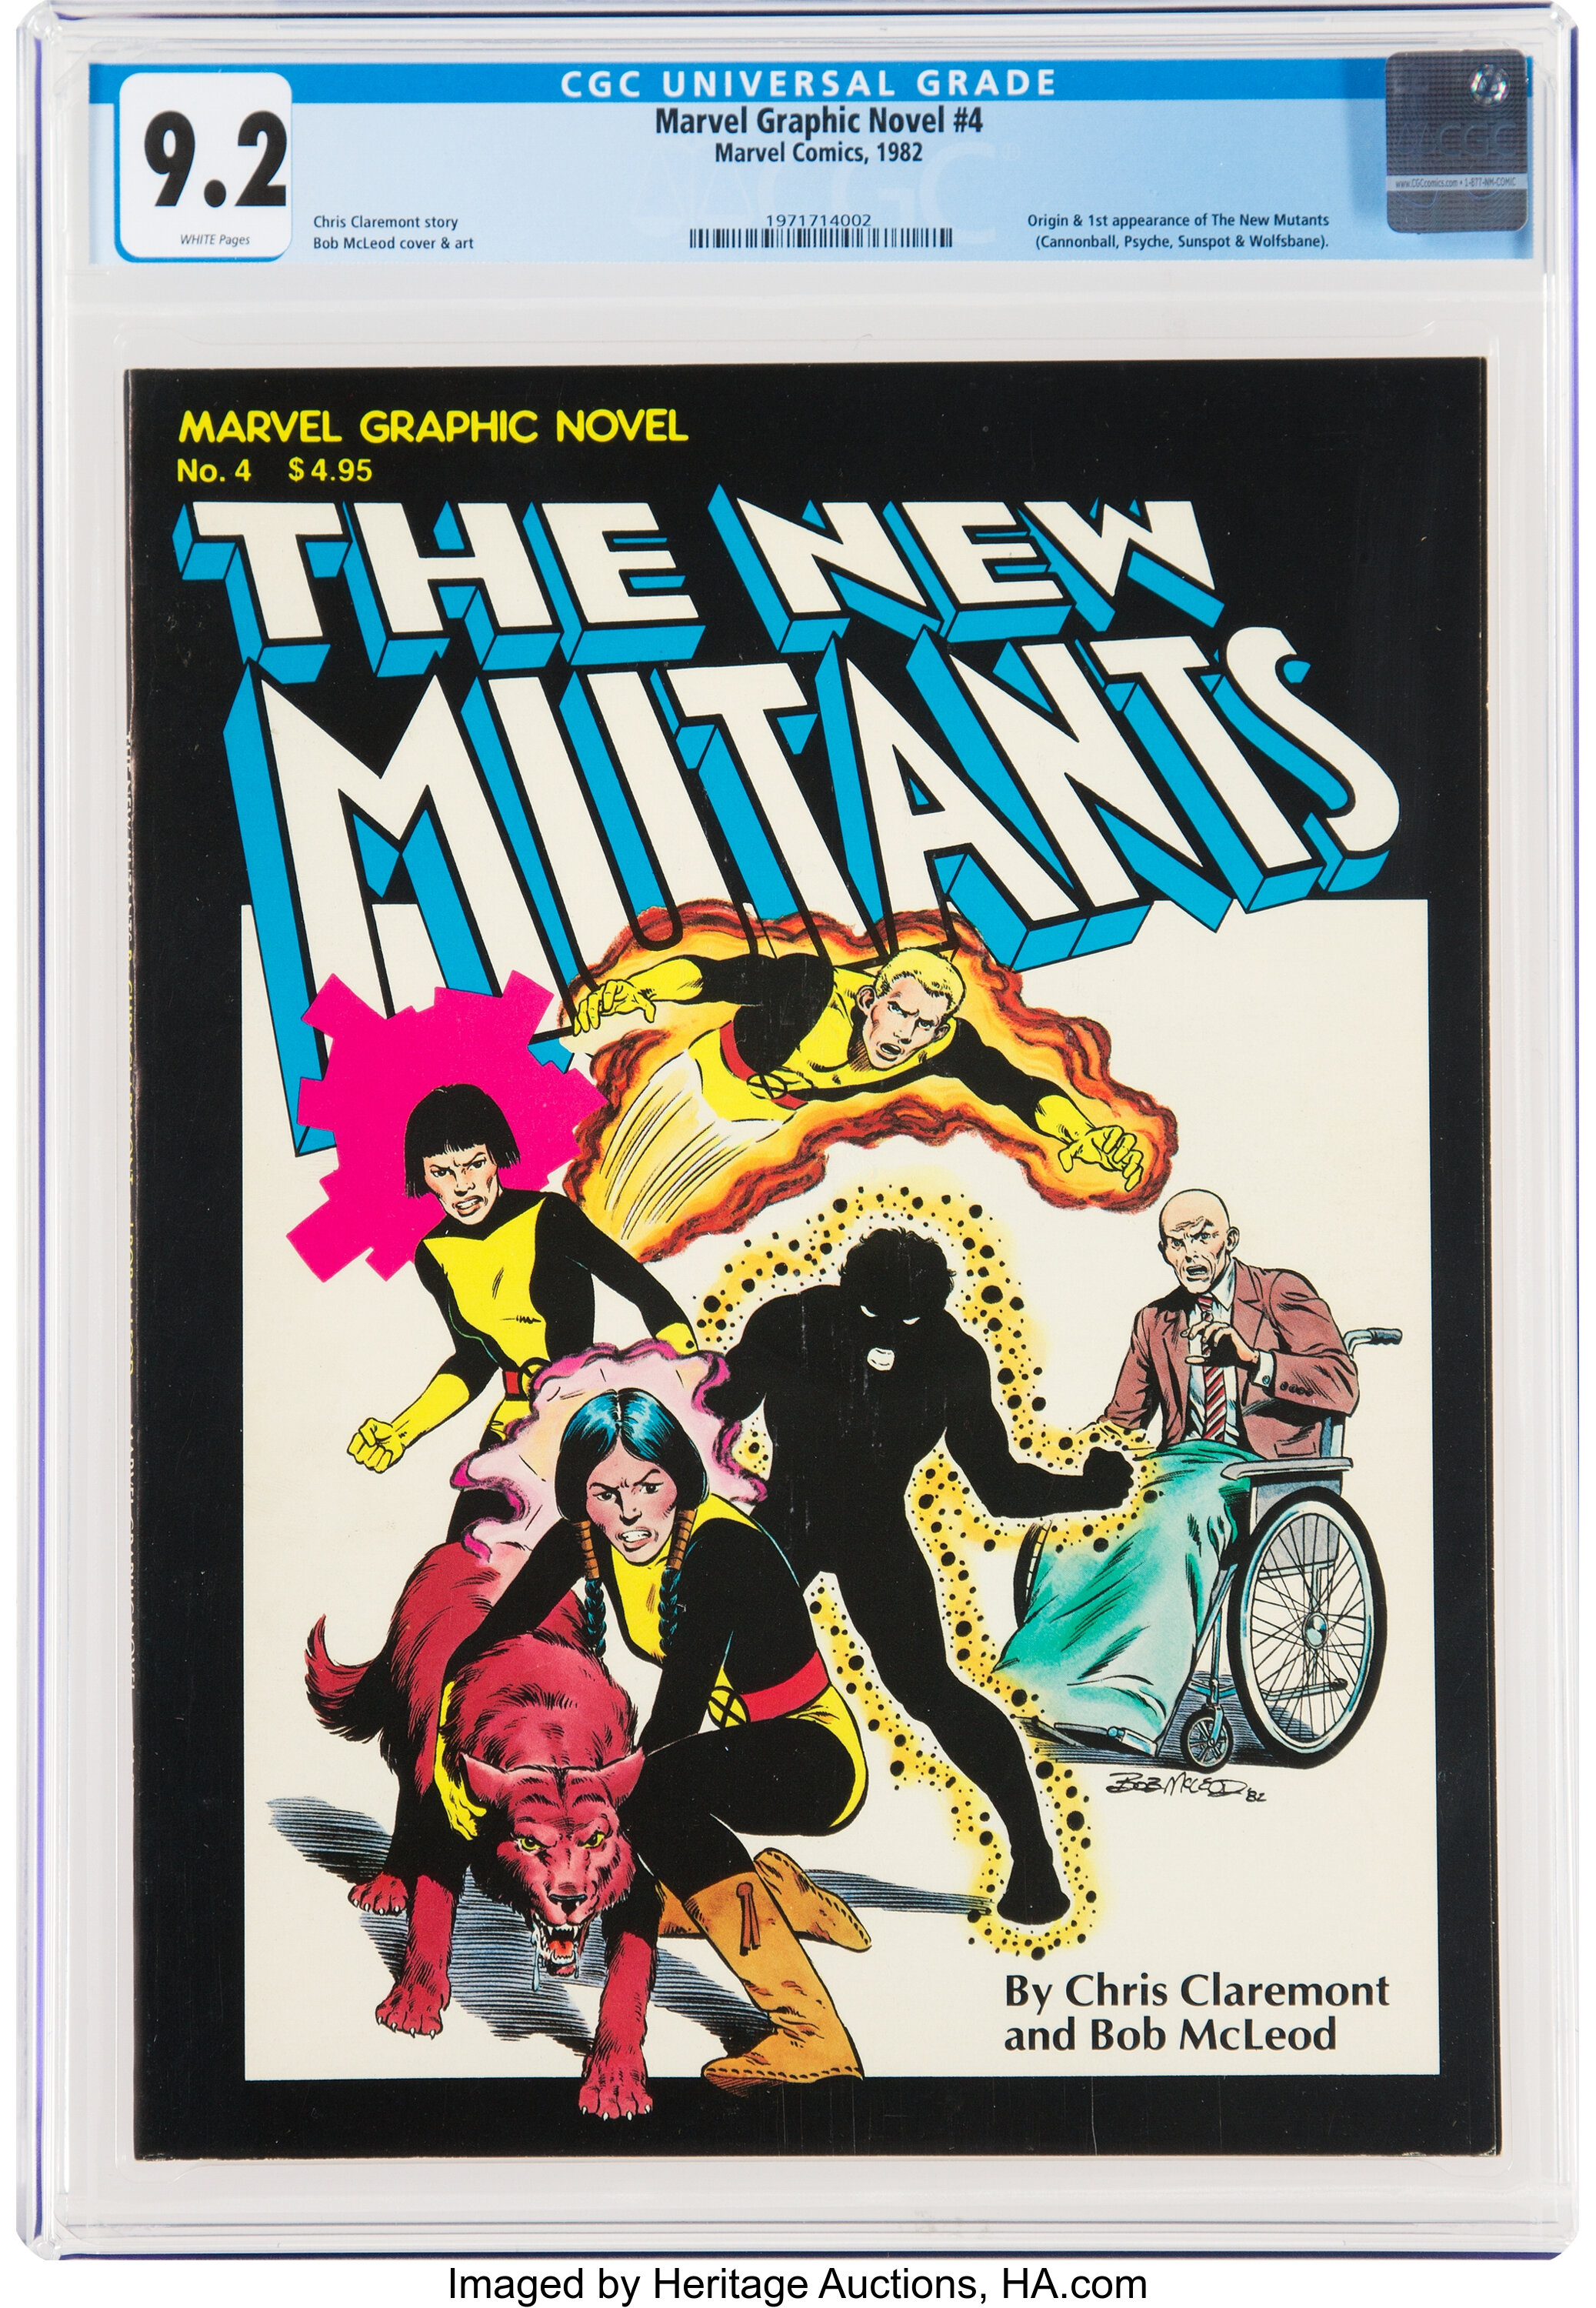 NEW MUTANTS I: Page 2 of 4